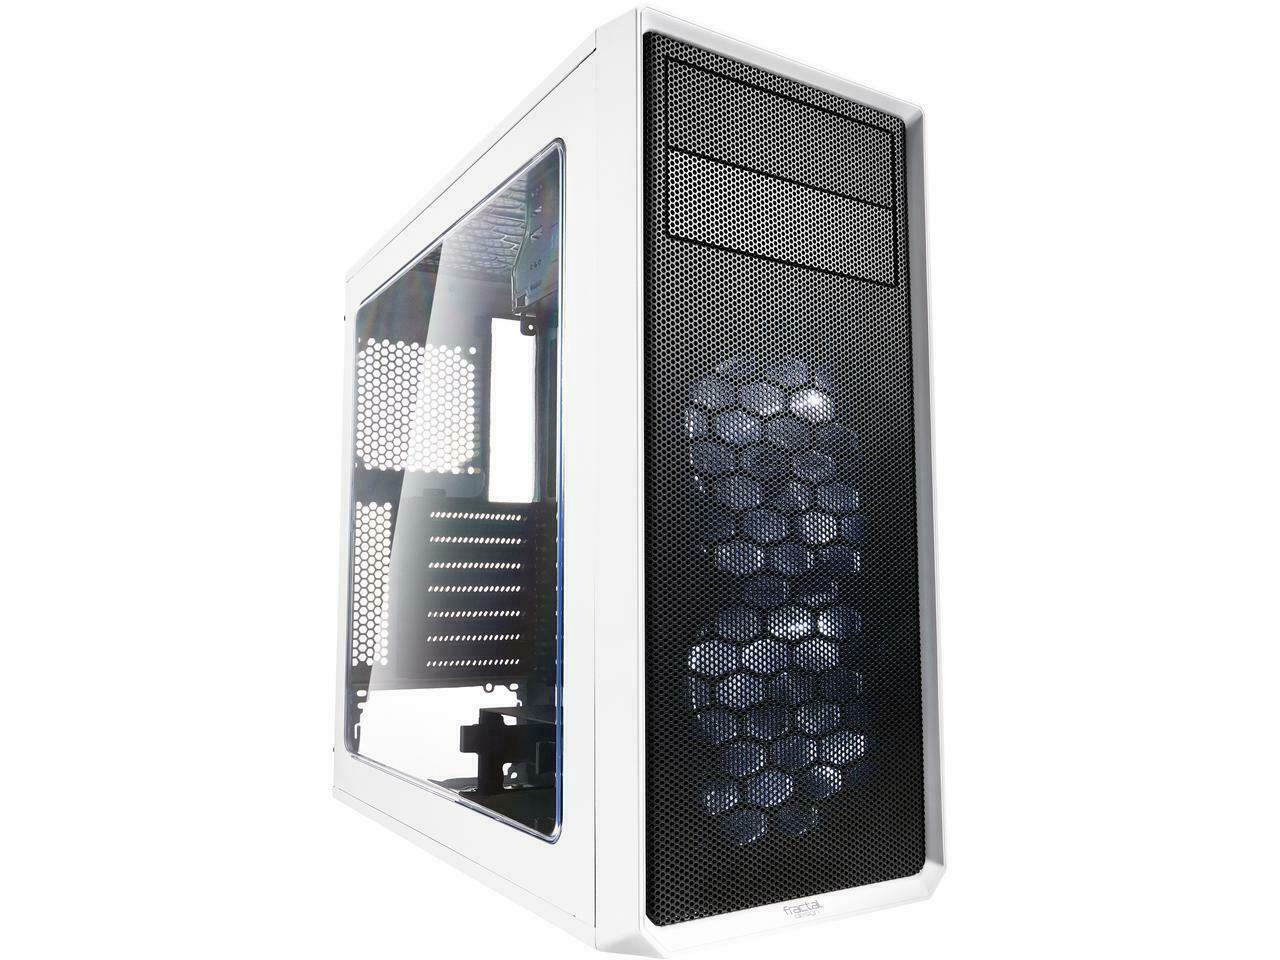 Fractal Design Focus G ATX Mid Tower Computer Case for $39.99 Shipped